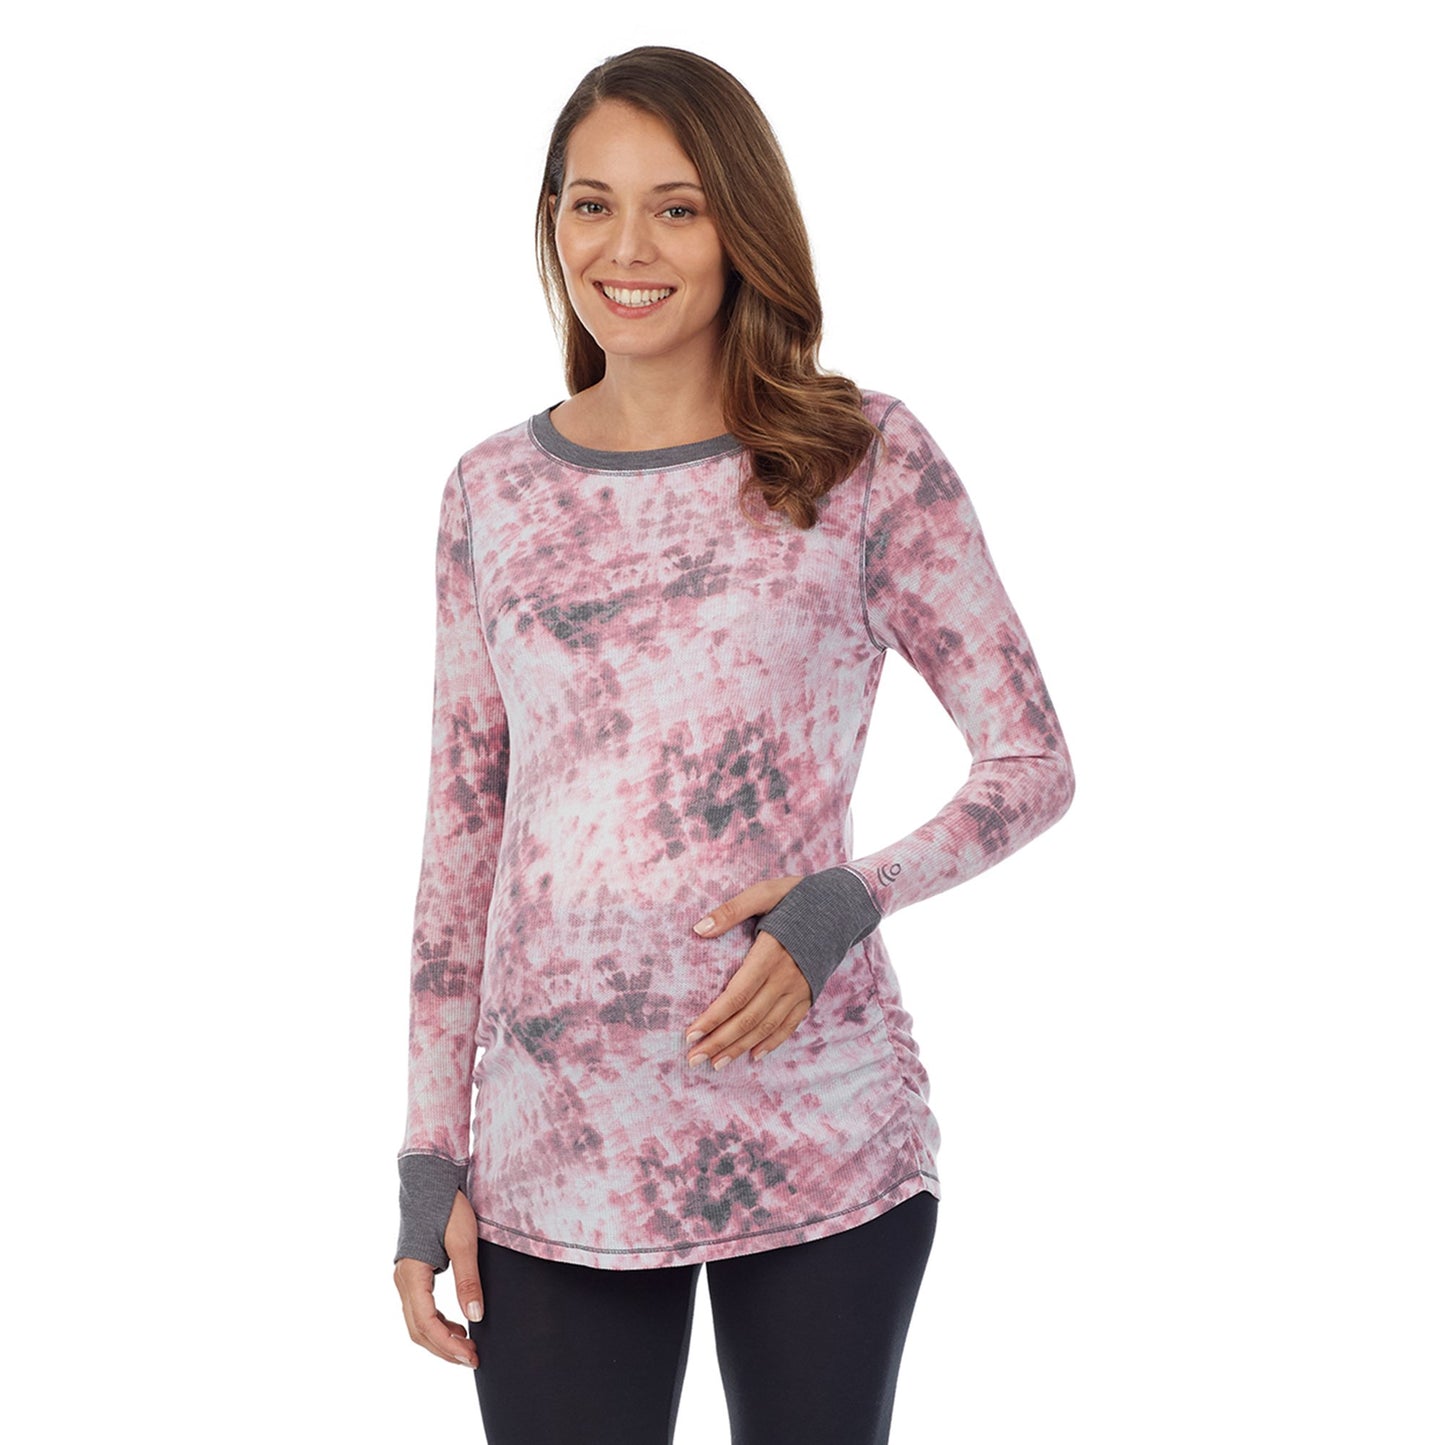 Pink Tie Dye;Model is wearing a size S. She is 5’10”, Bust 34”, Waist 34”, Hips 40”. #Model is wearing a maternity bump.@ A lady wearingStretch Thermal Maternity Long Sleeve Ballet Neck Top with Pink Tie Dye print